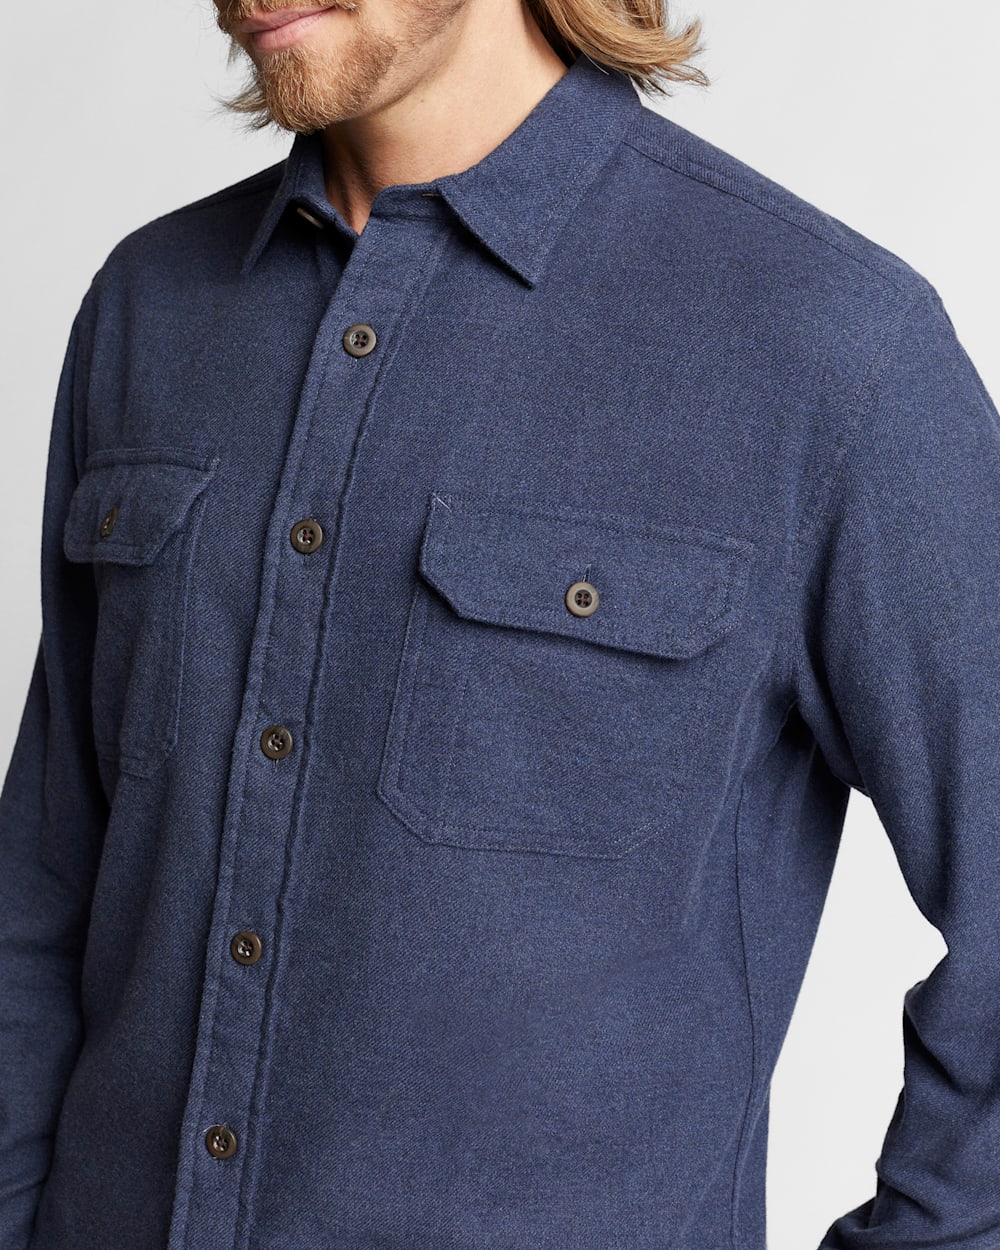 ALTERNATE VIEW OF BURNSIDE DOUBLE-BRUSHED FLANNEL SHIRT IN BLUE image number 4